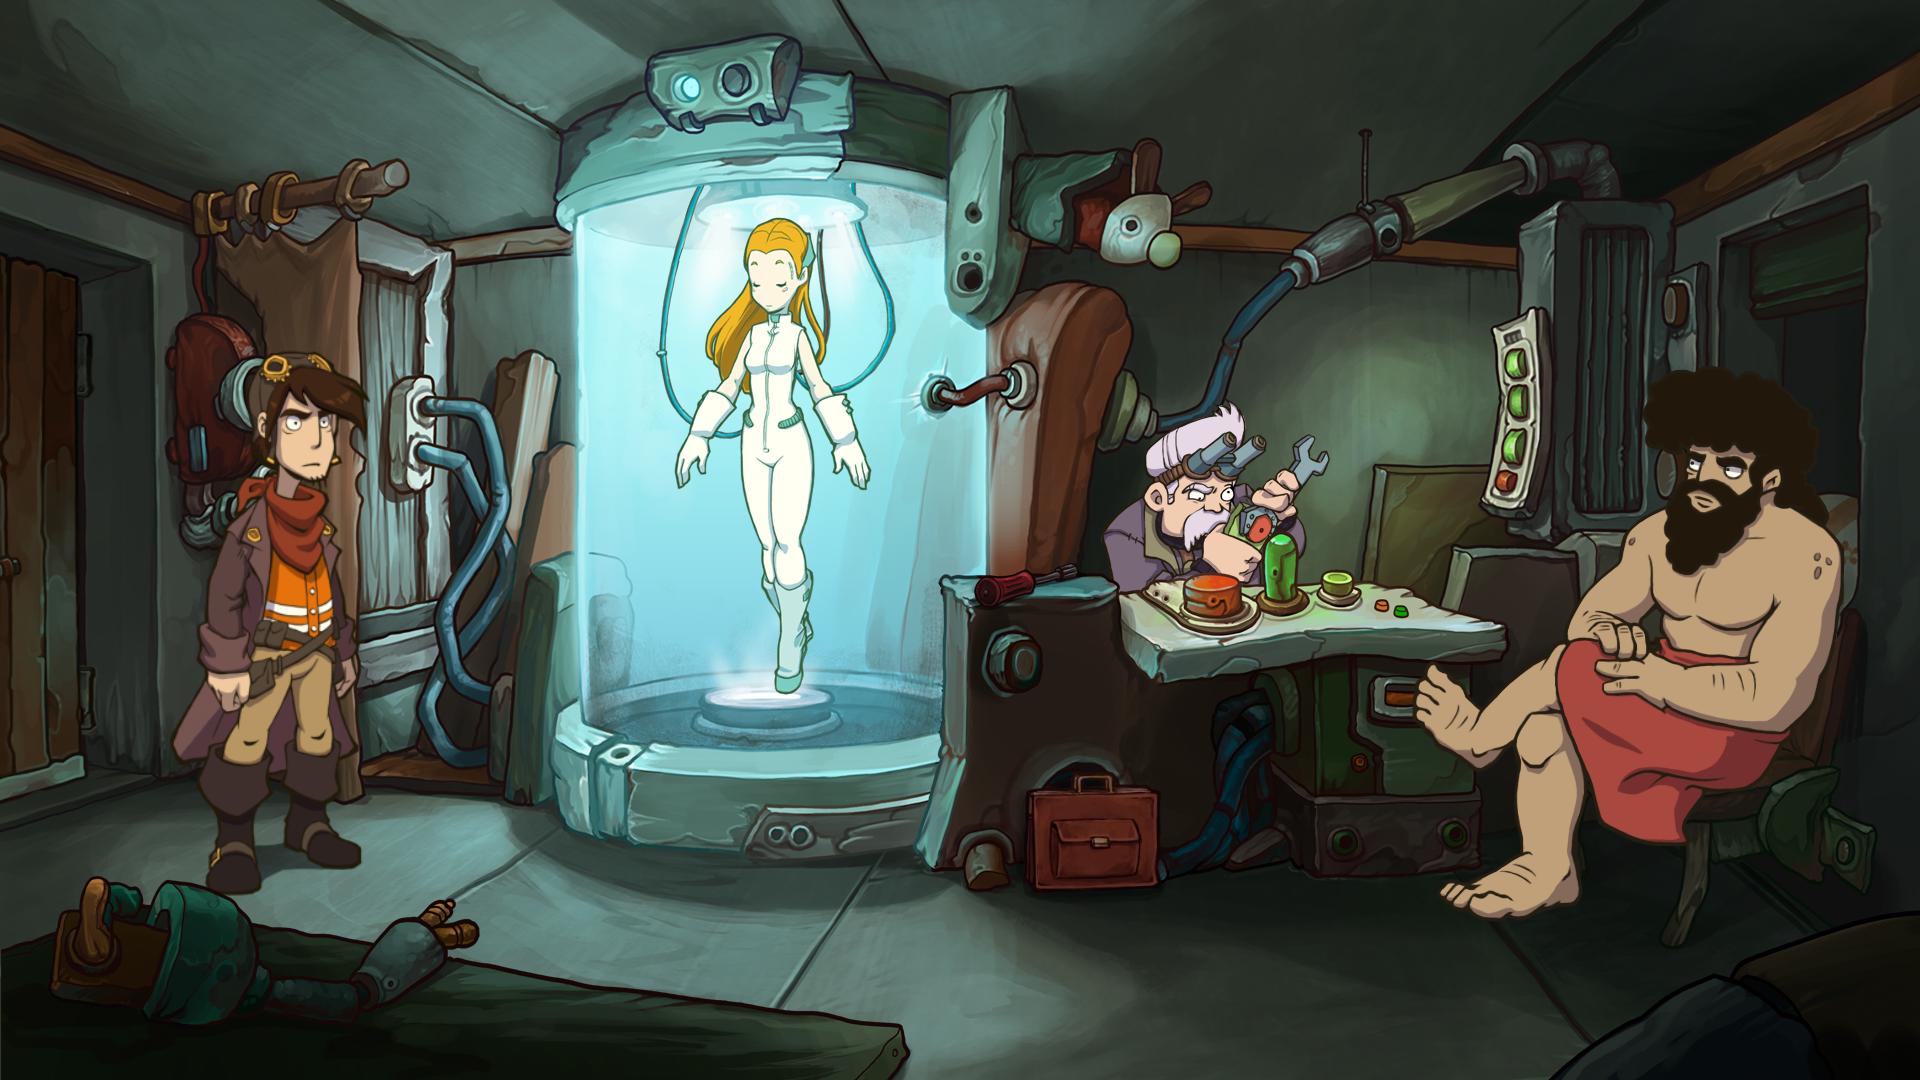 Deponia: The Complete Journey on Steam